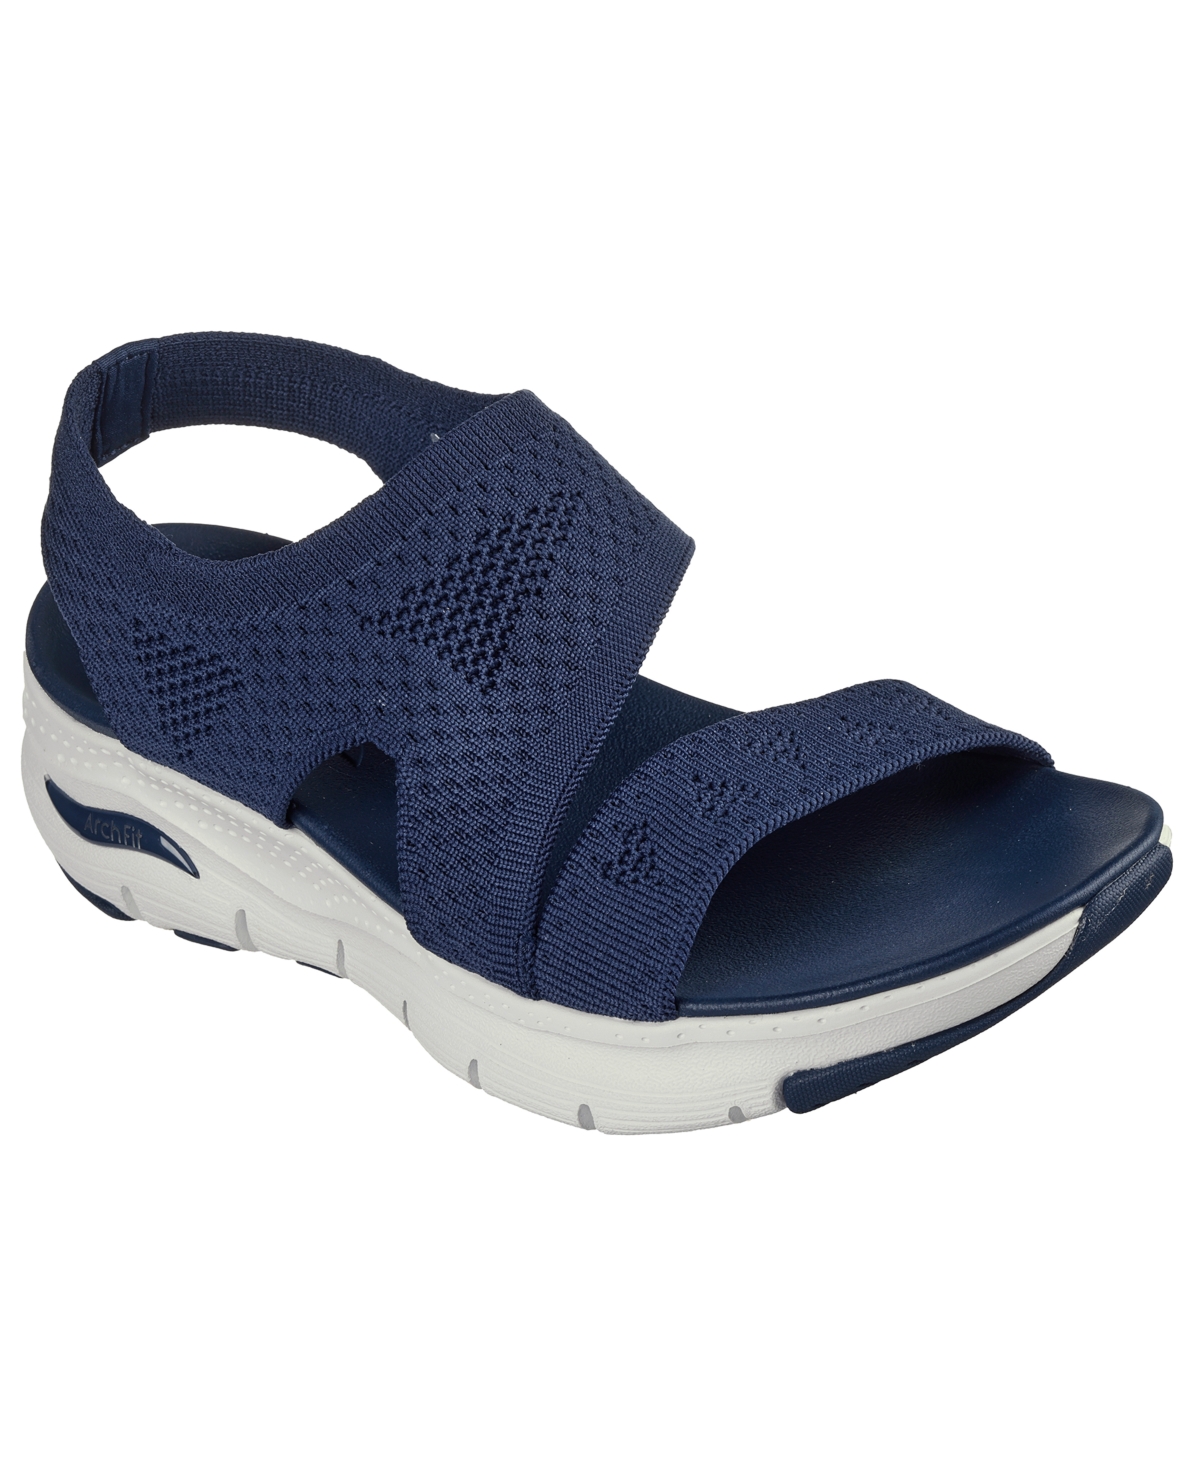 Women's Cali Arch Fit - Brightest Day Slip-On Sandals from Finish Line - Navy